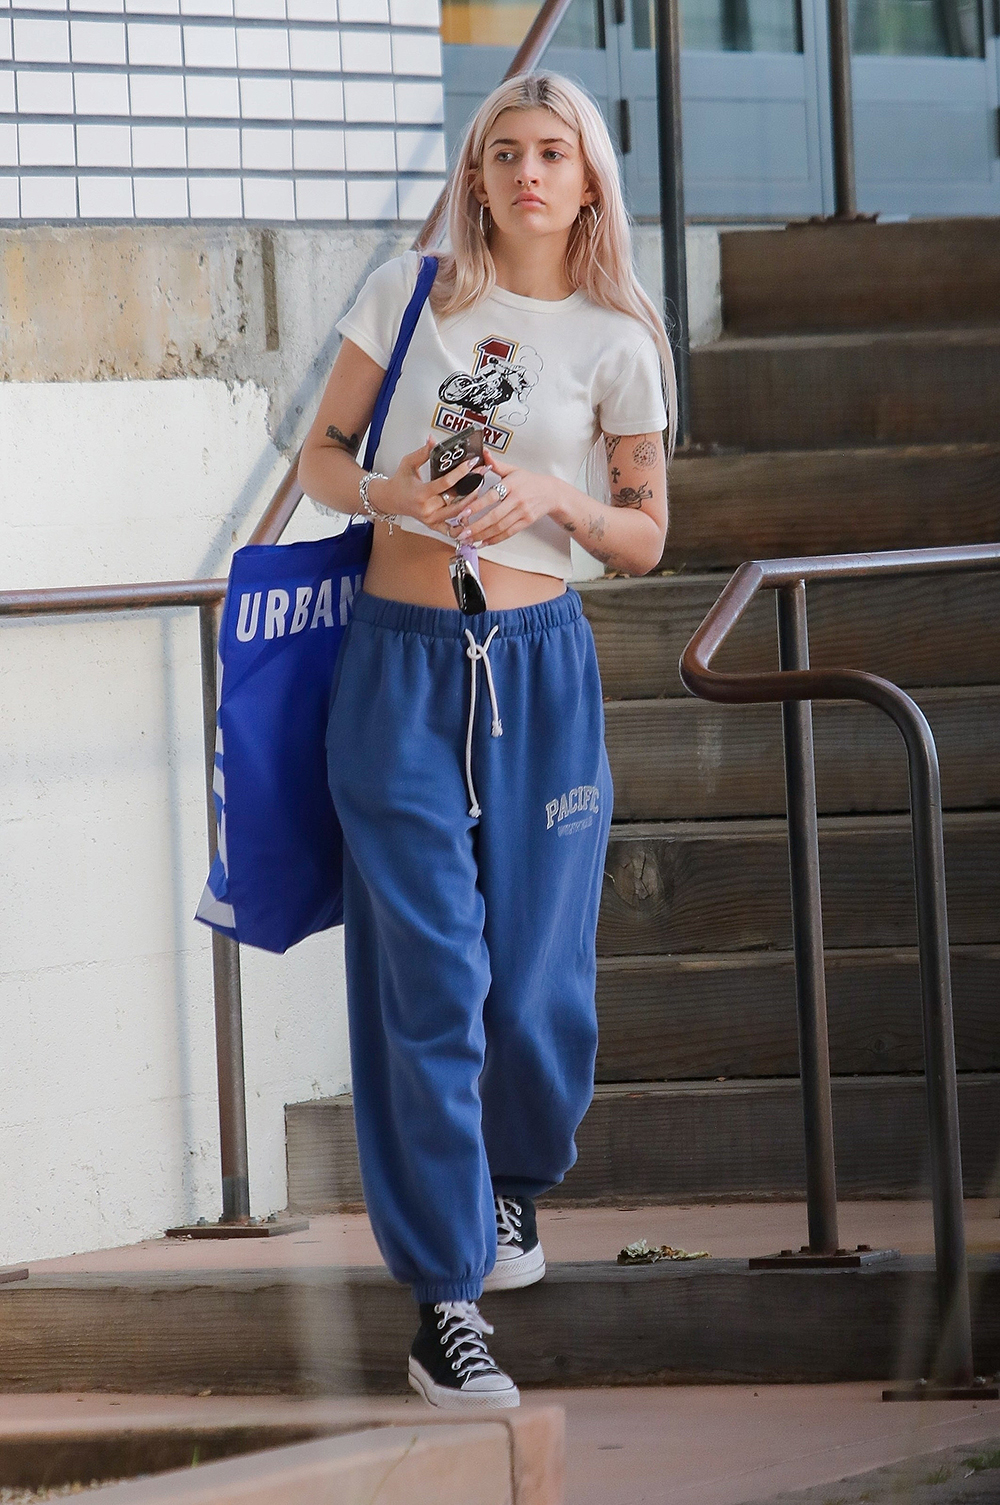 Kylie Jenner: Champion Tee, Lace-Up Boots